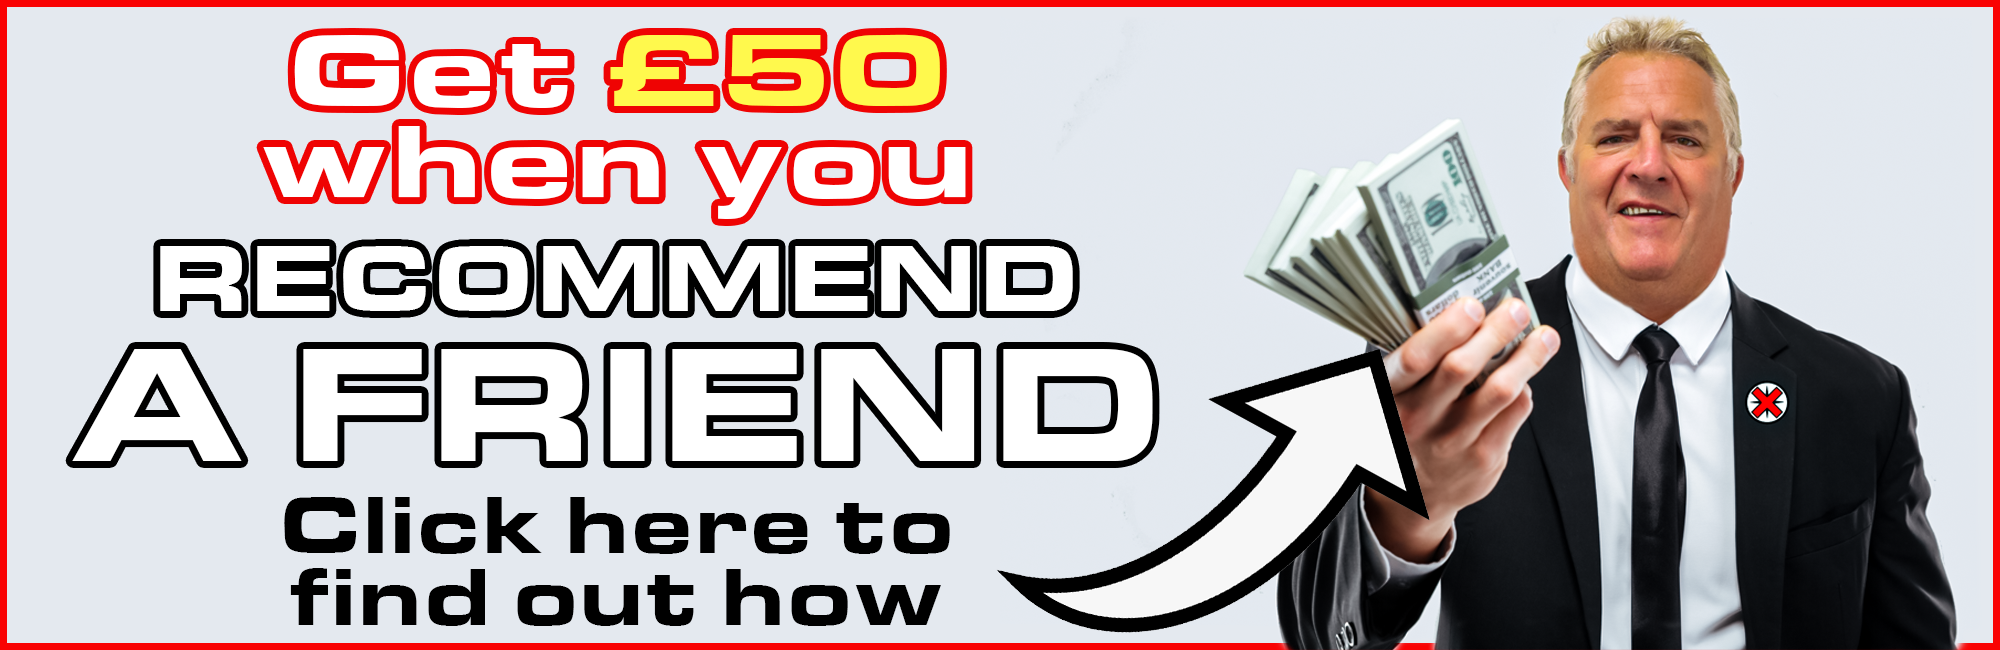 Recommend a Friend - and earn £50!